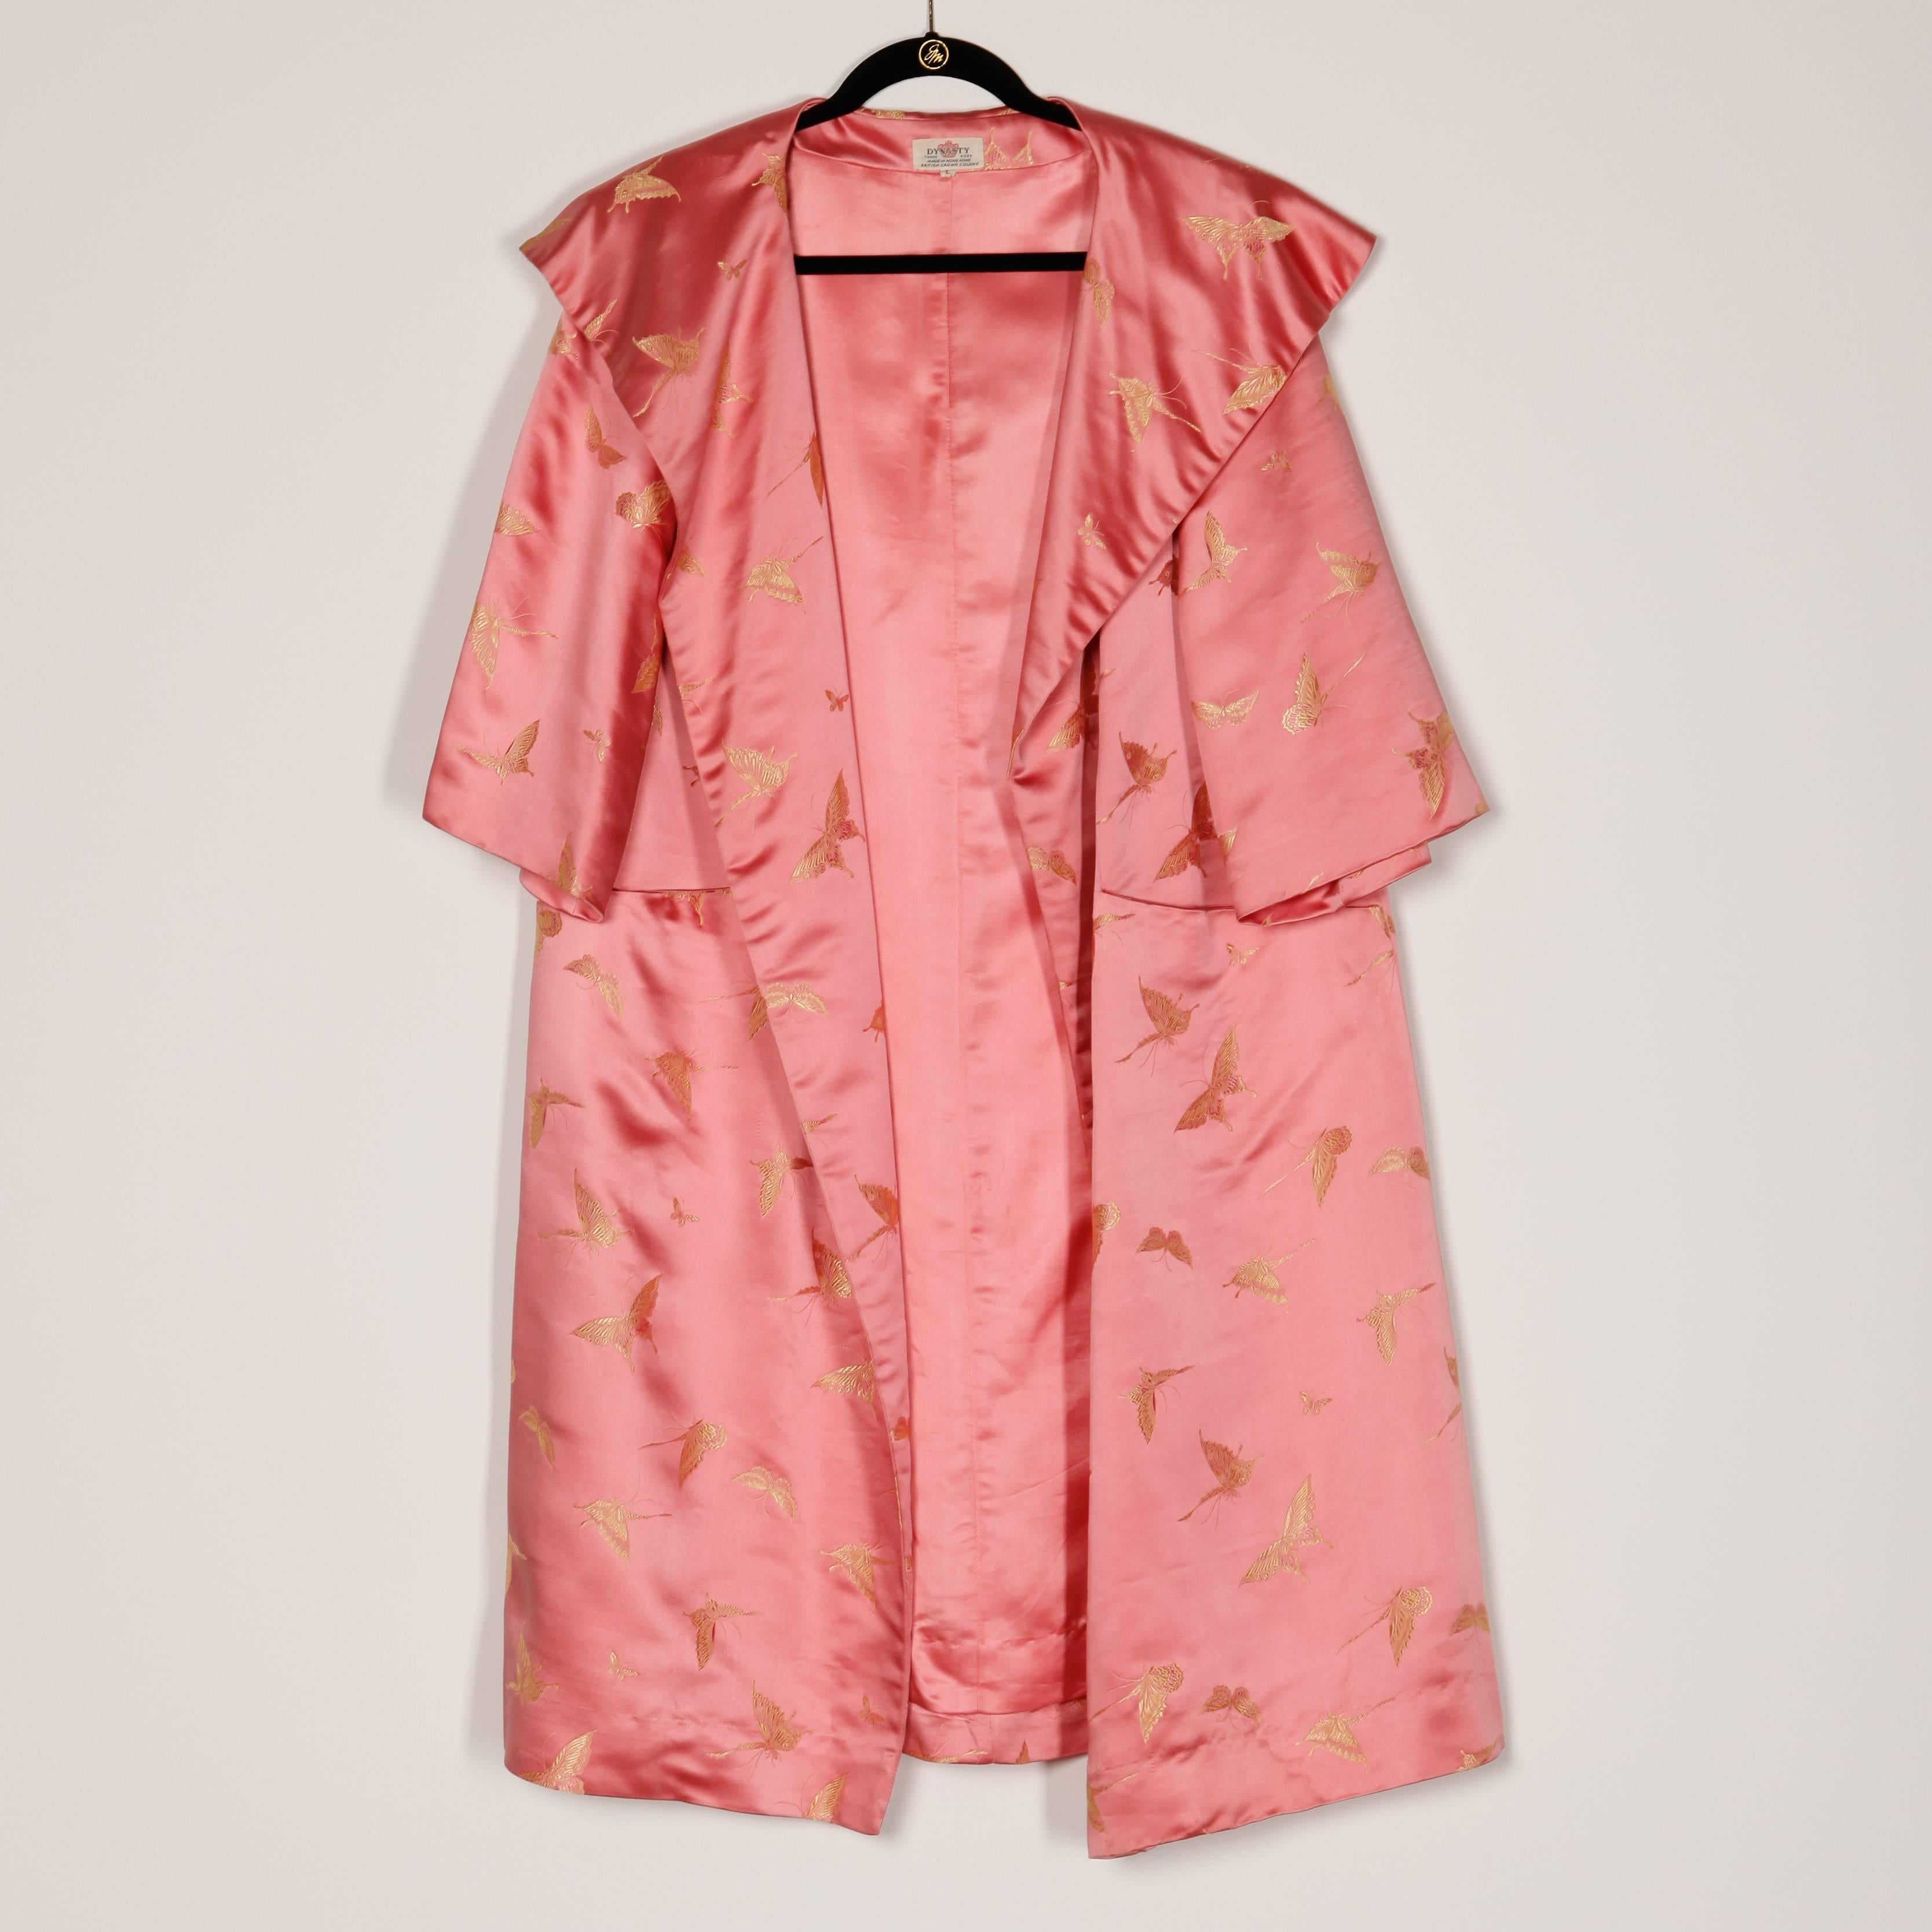 Gorgeous heavy weight pink silk satin swing coat with gold butterflies by Dynasty. Extremely well made with hand stitched seams and beautiful silk fabric. Big pop up collar, 3/4 length sleeves and side pockets.

Details: 

Fully Lined
Front